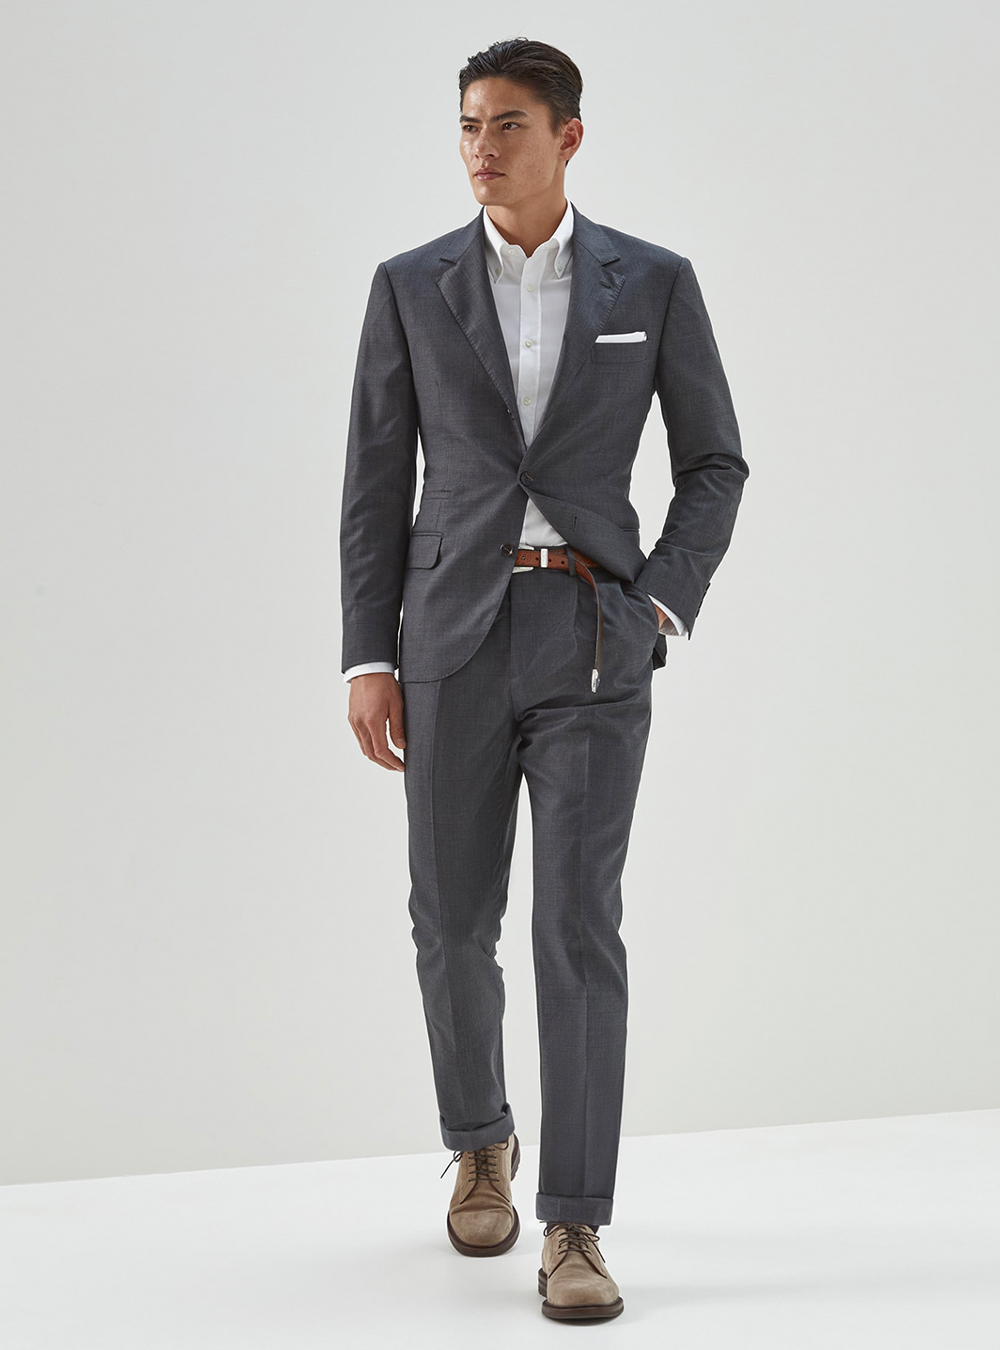 Grey suit, white dress shirt and beige suede derby shoes